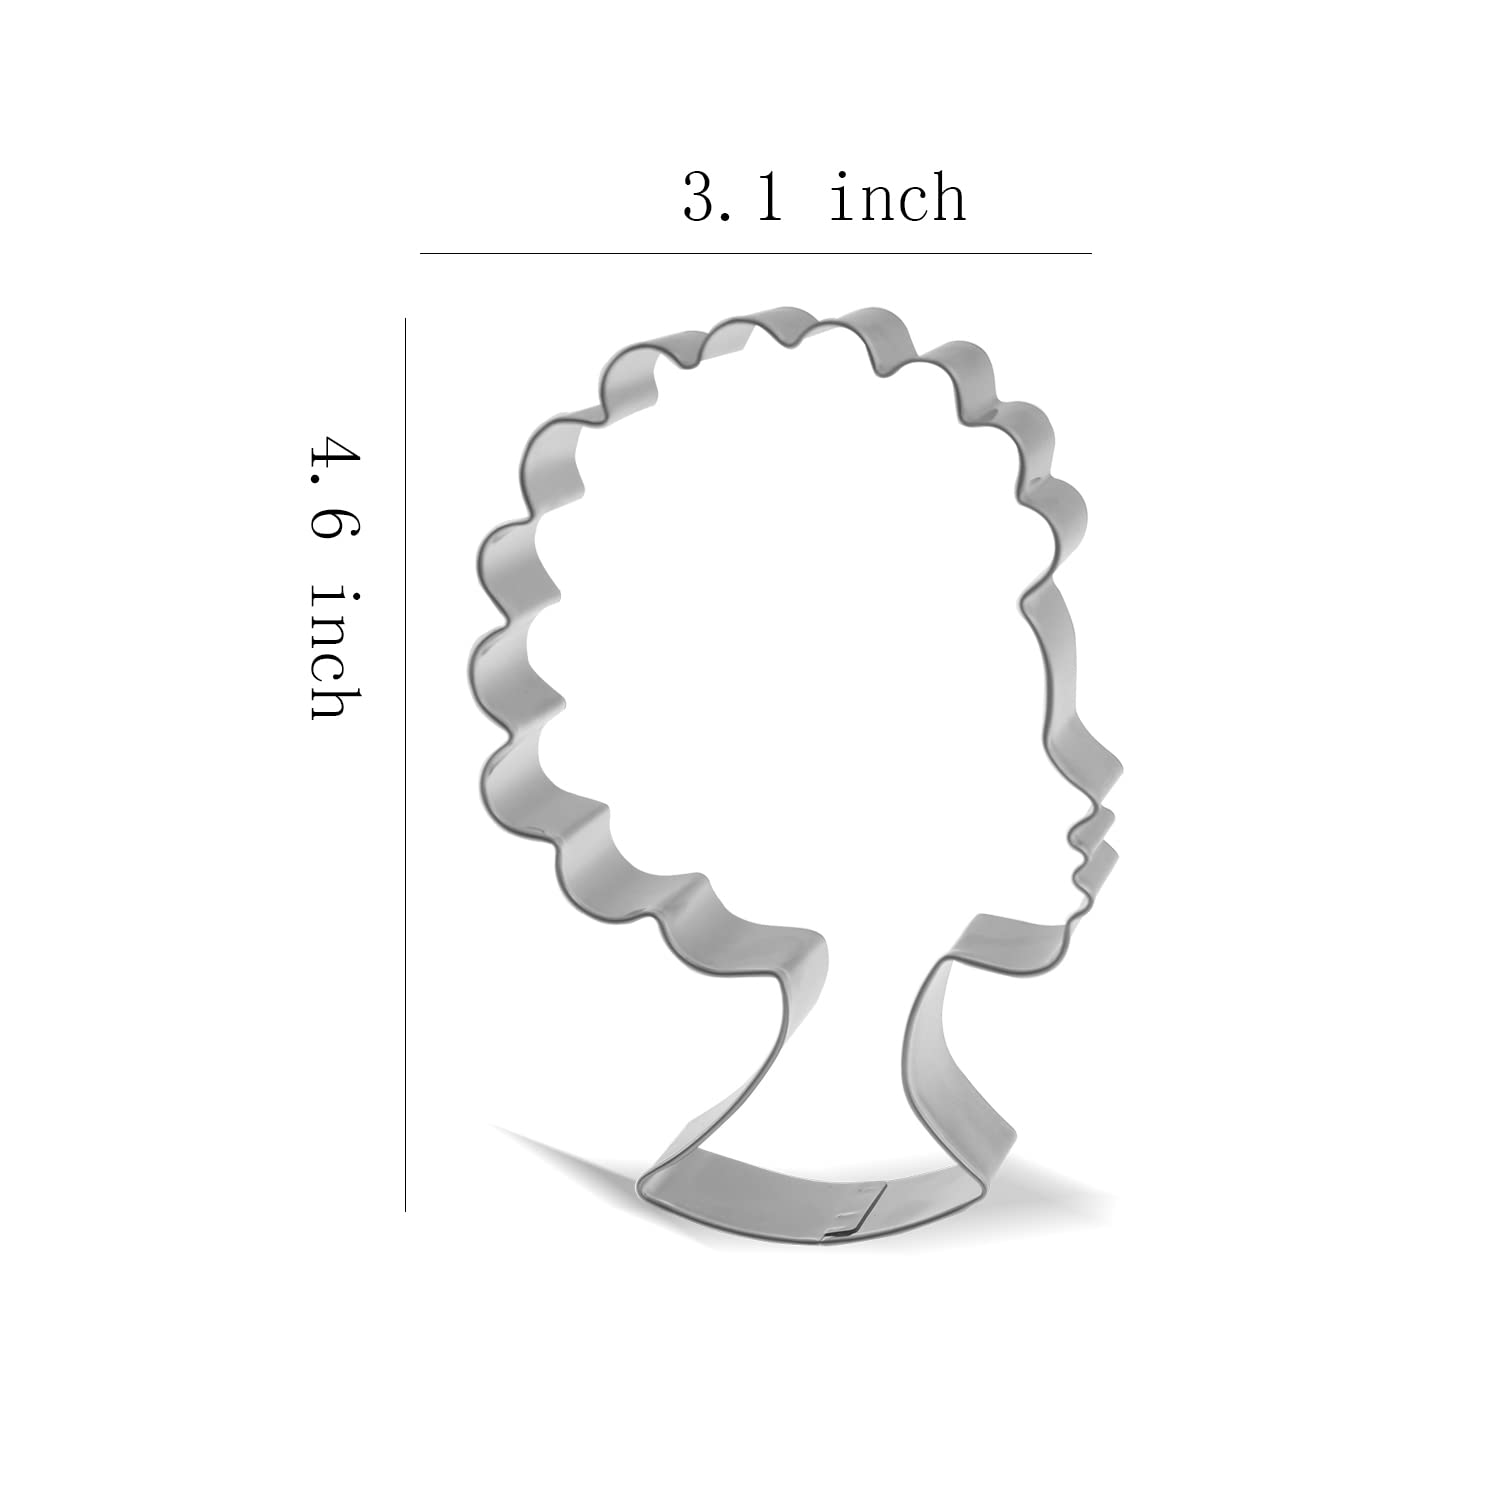 4.6 inch Girl Face with Short Curly Natural Hair Cookie Cutter - Stainless Steel